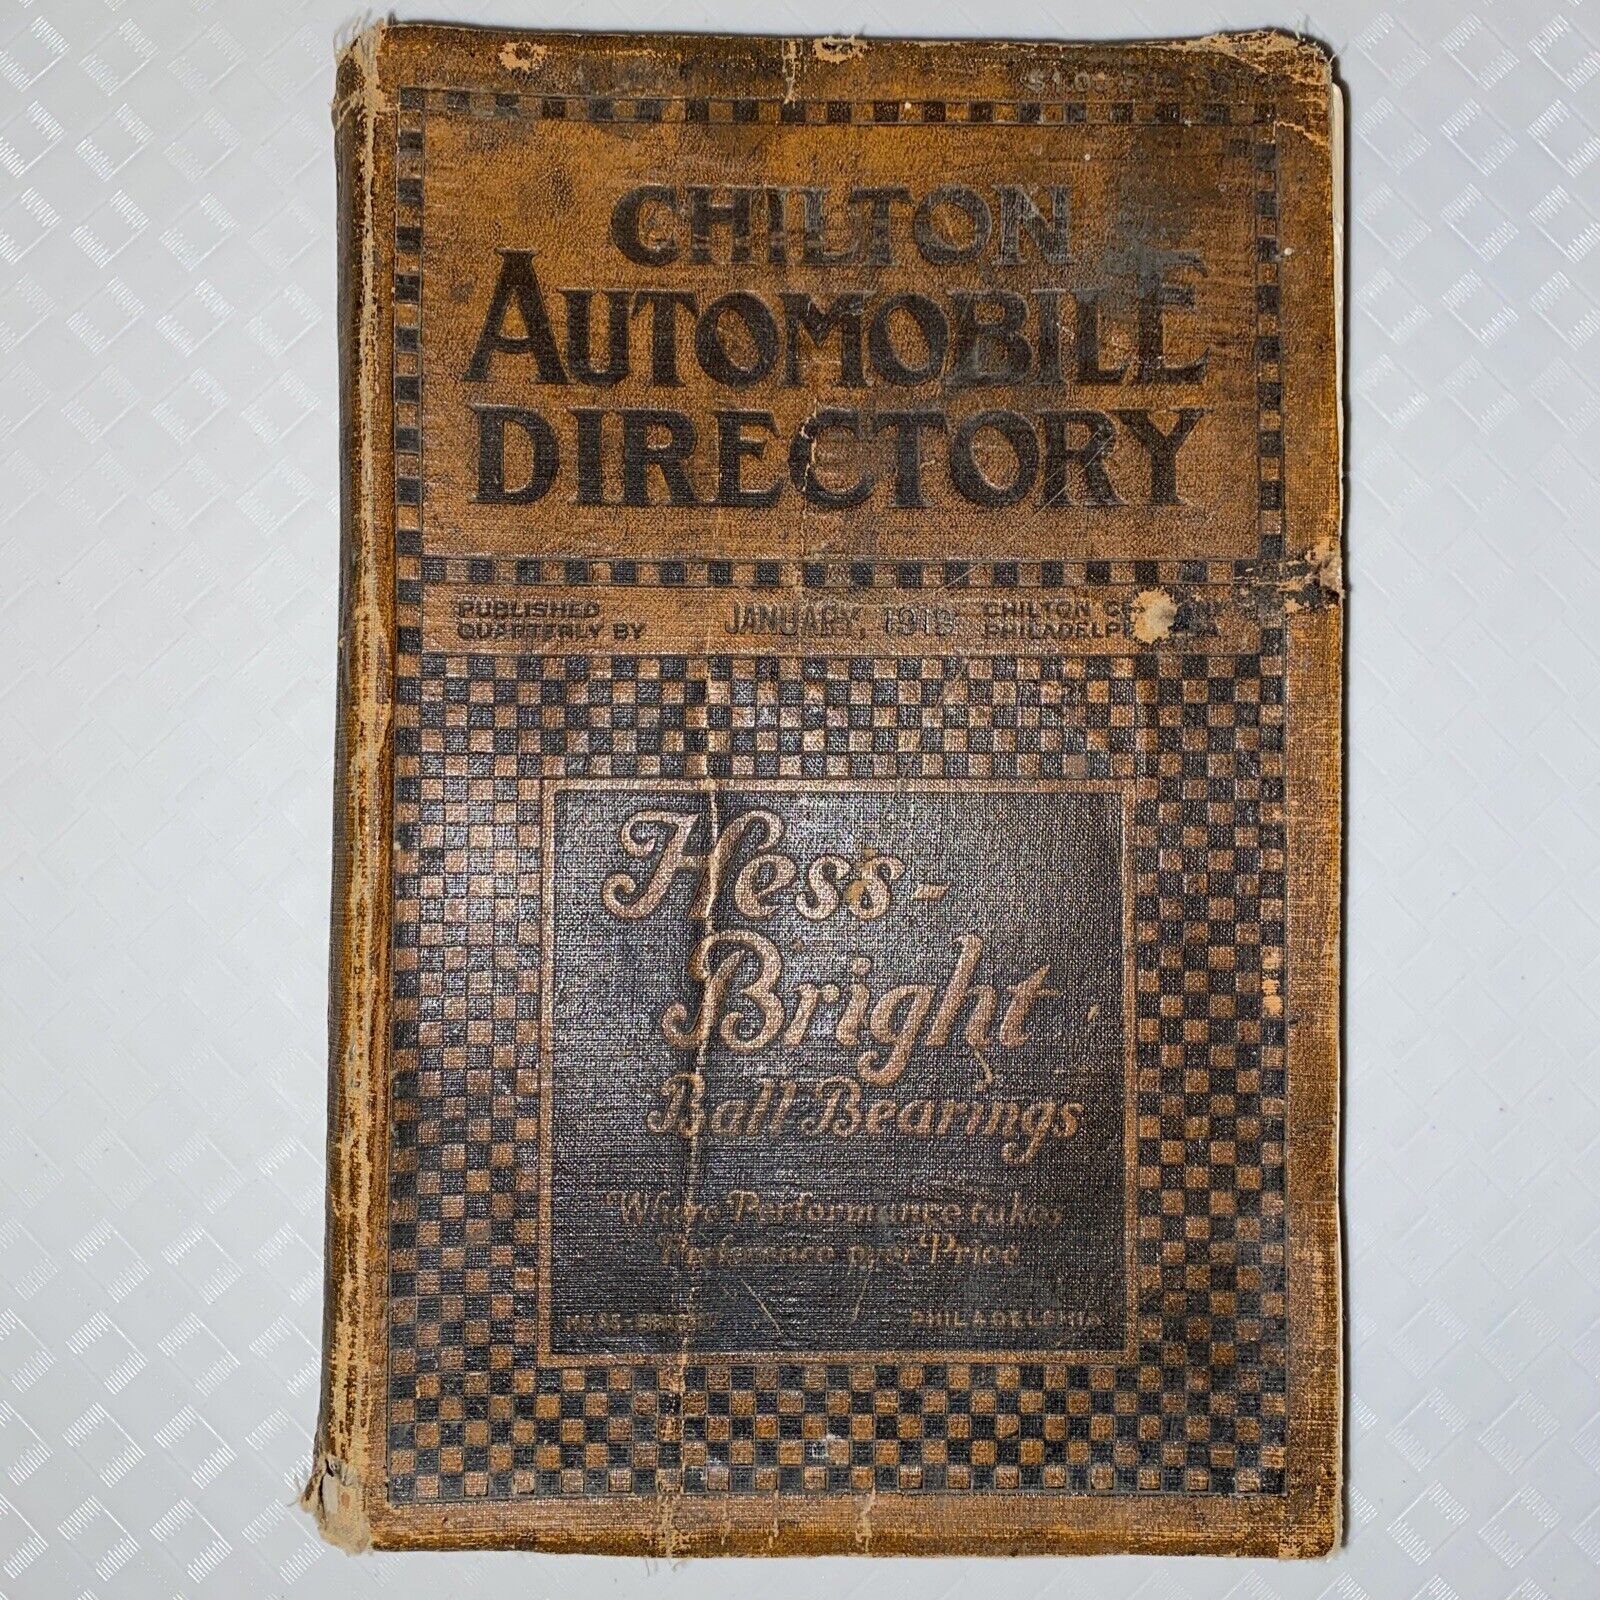 CHILTON Automobile Directory January 1919 Car Parts Reference